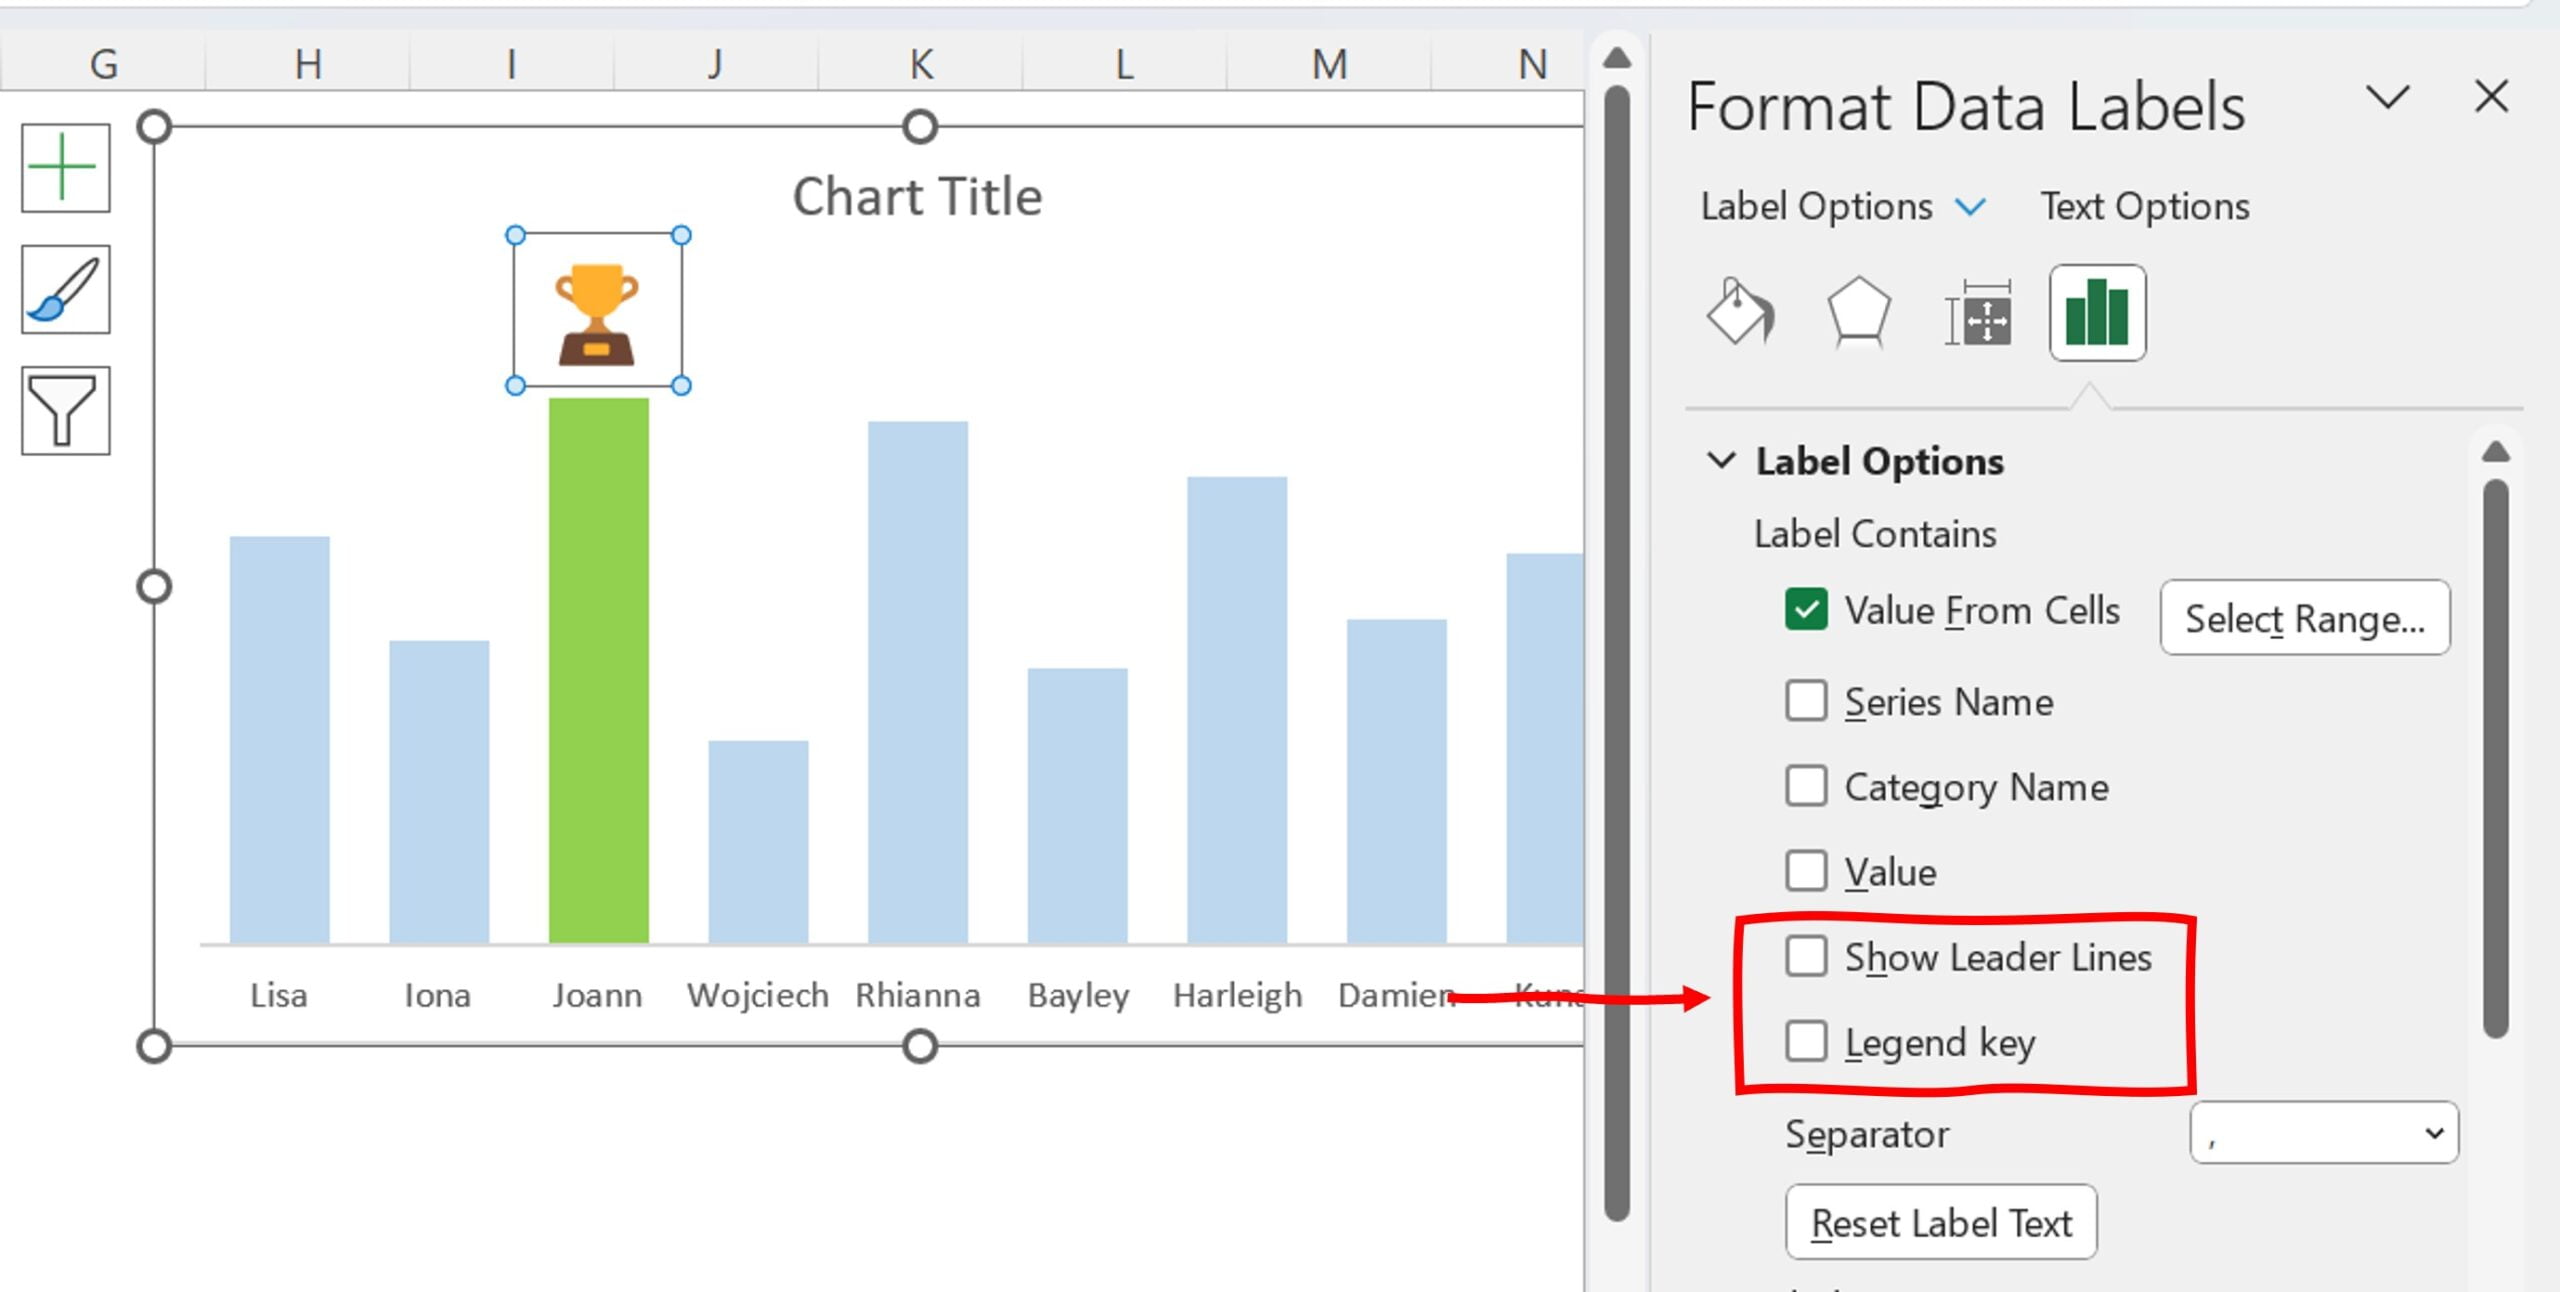 Customize the Data Labels